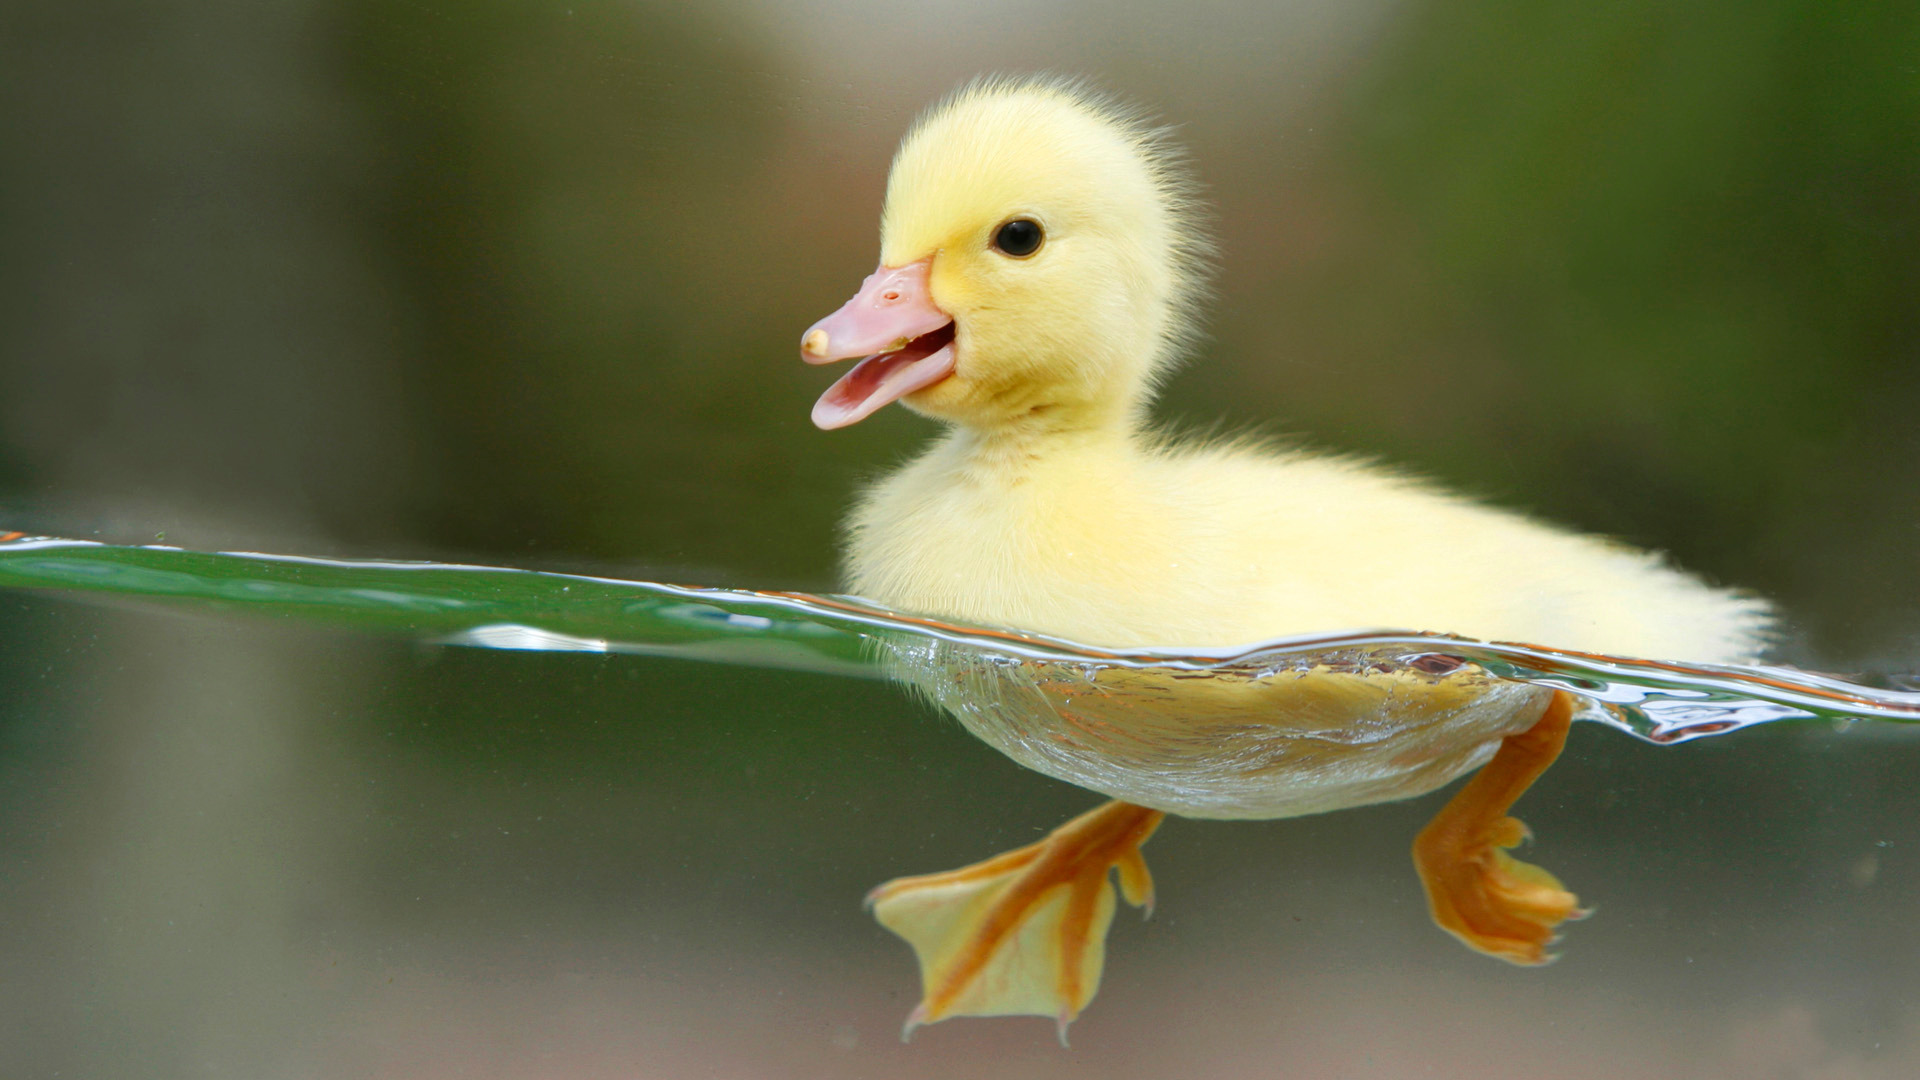 Duckling Pictures